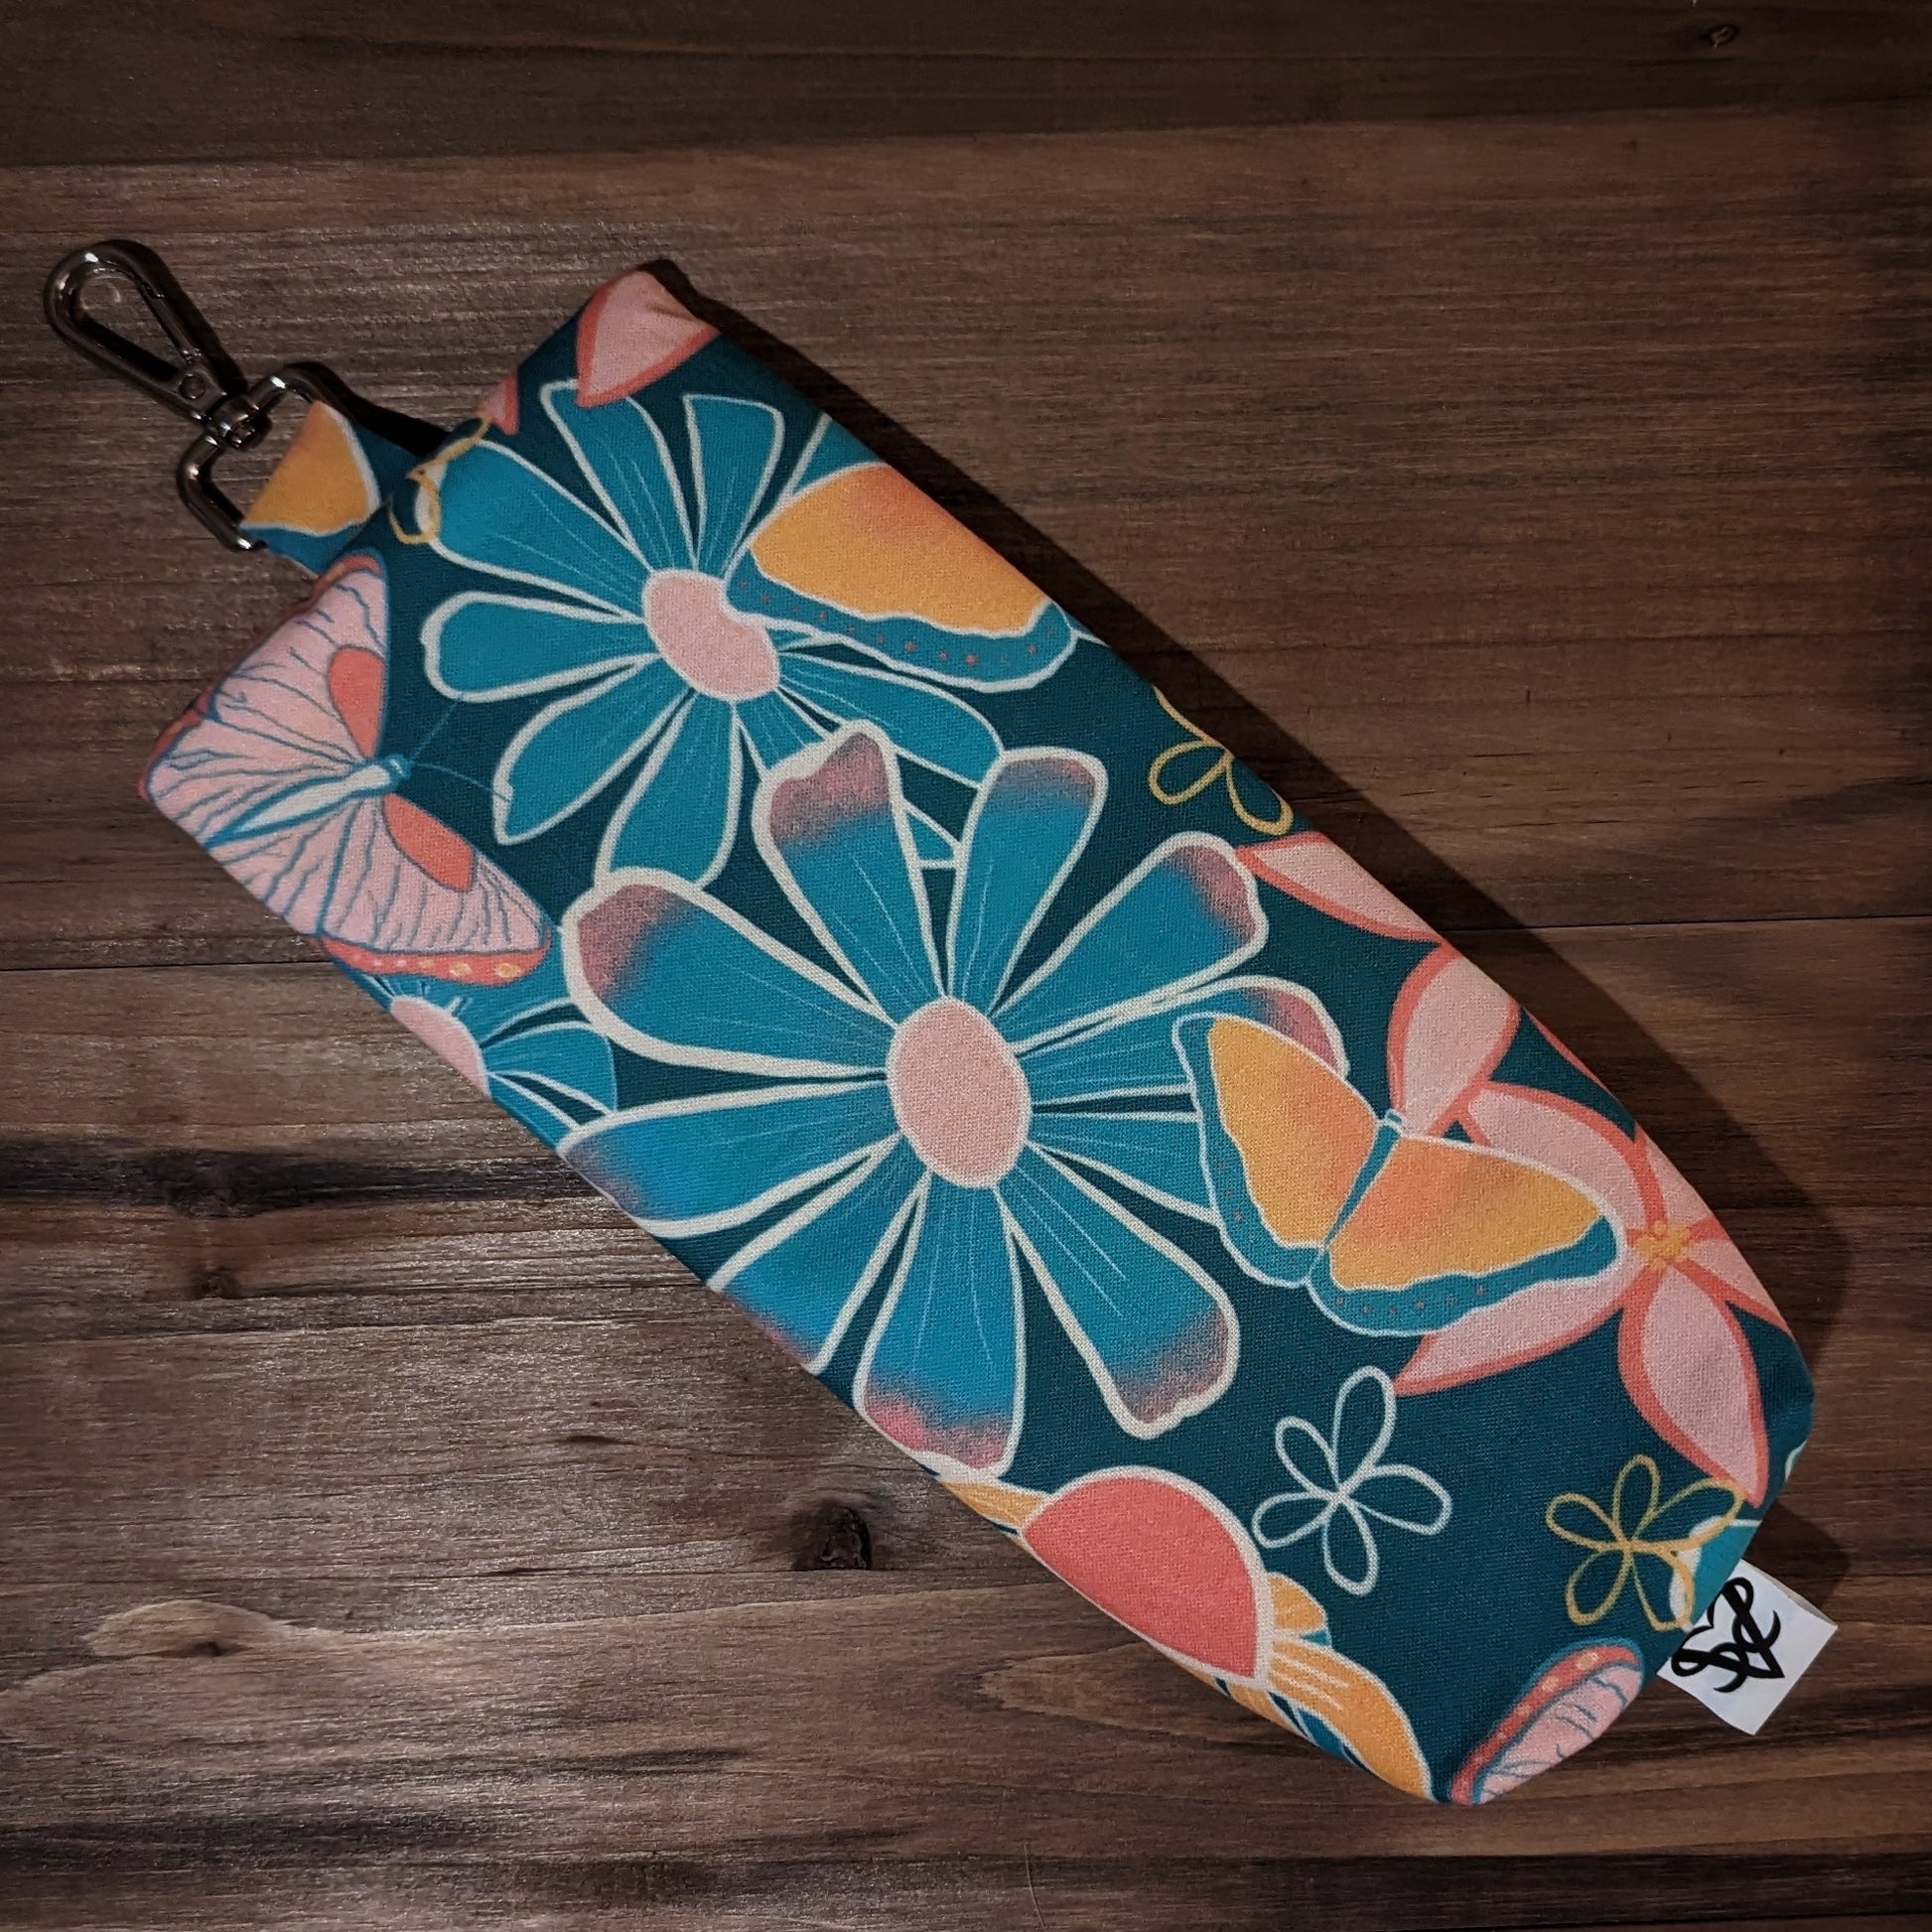 The back of the Butterfly Garden hanging case in shades of teal, yellow, pink, and white.